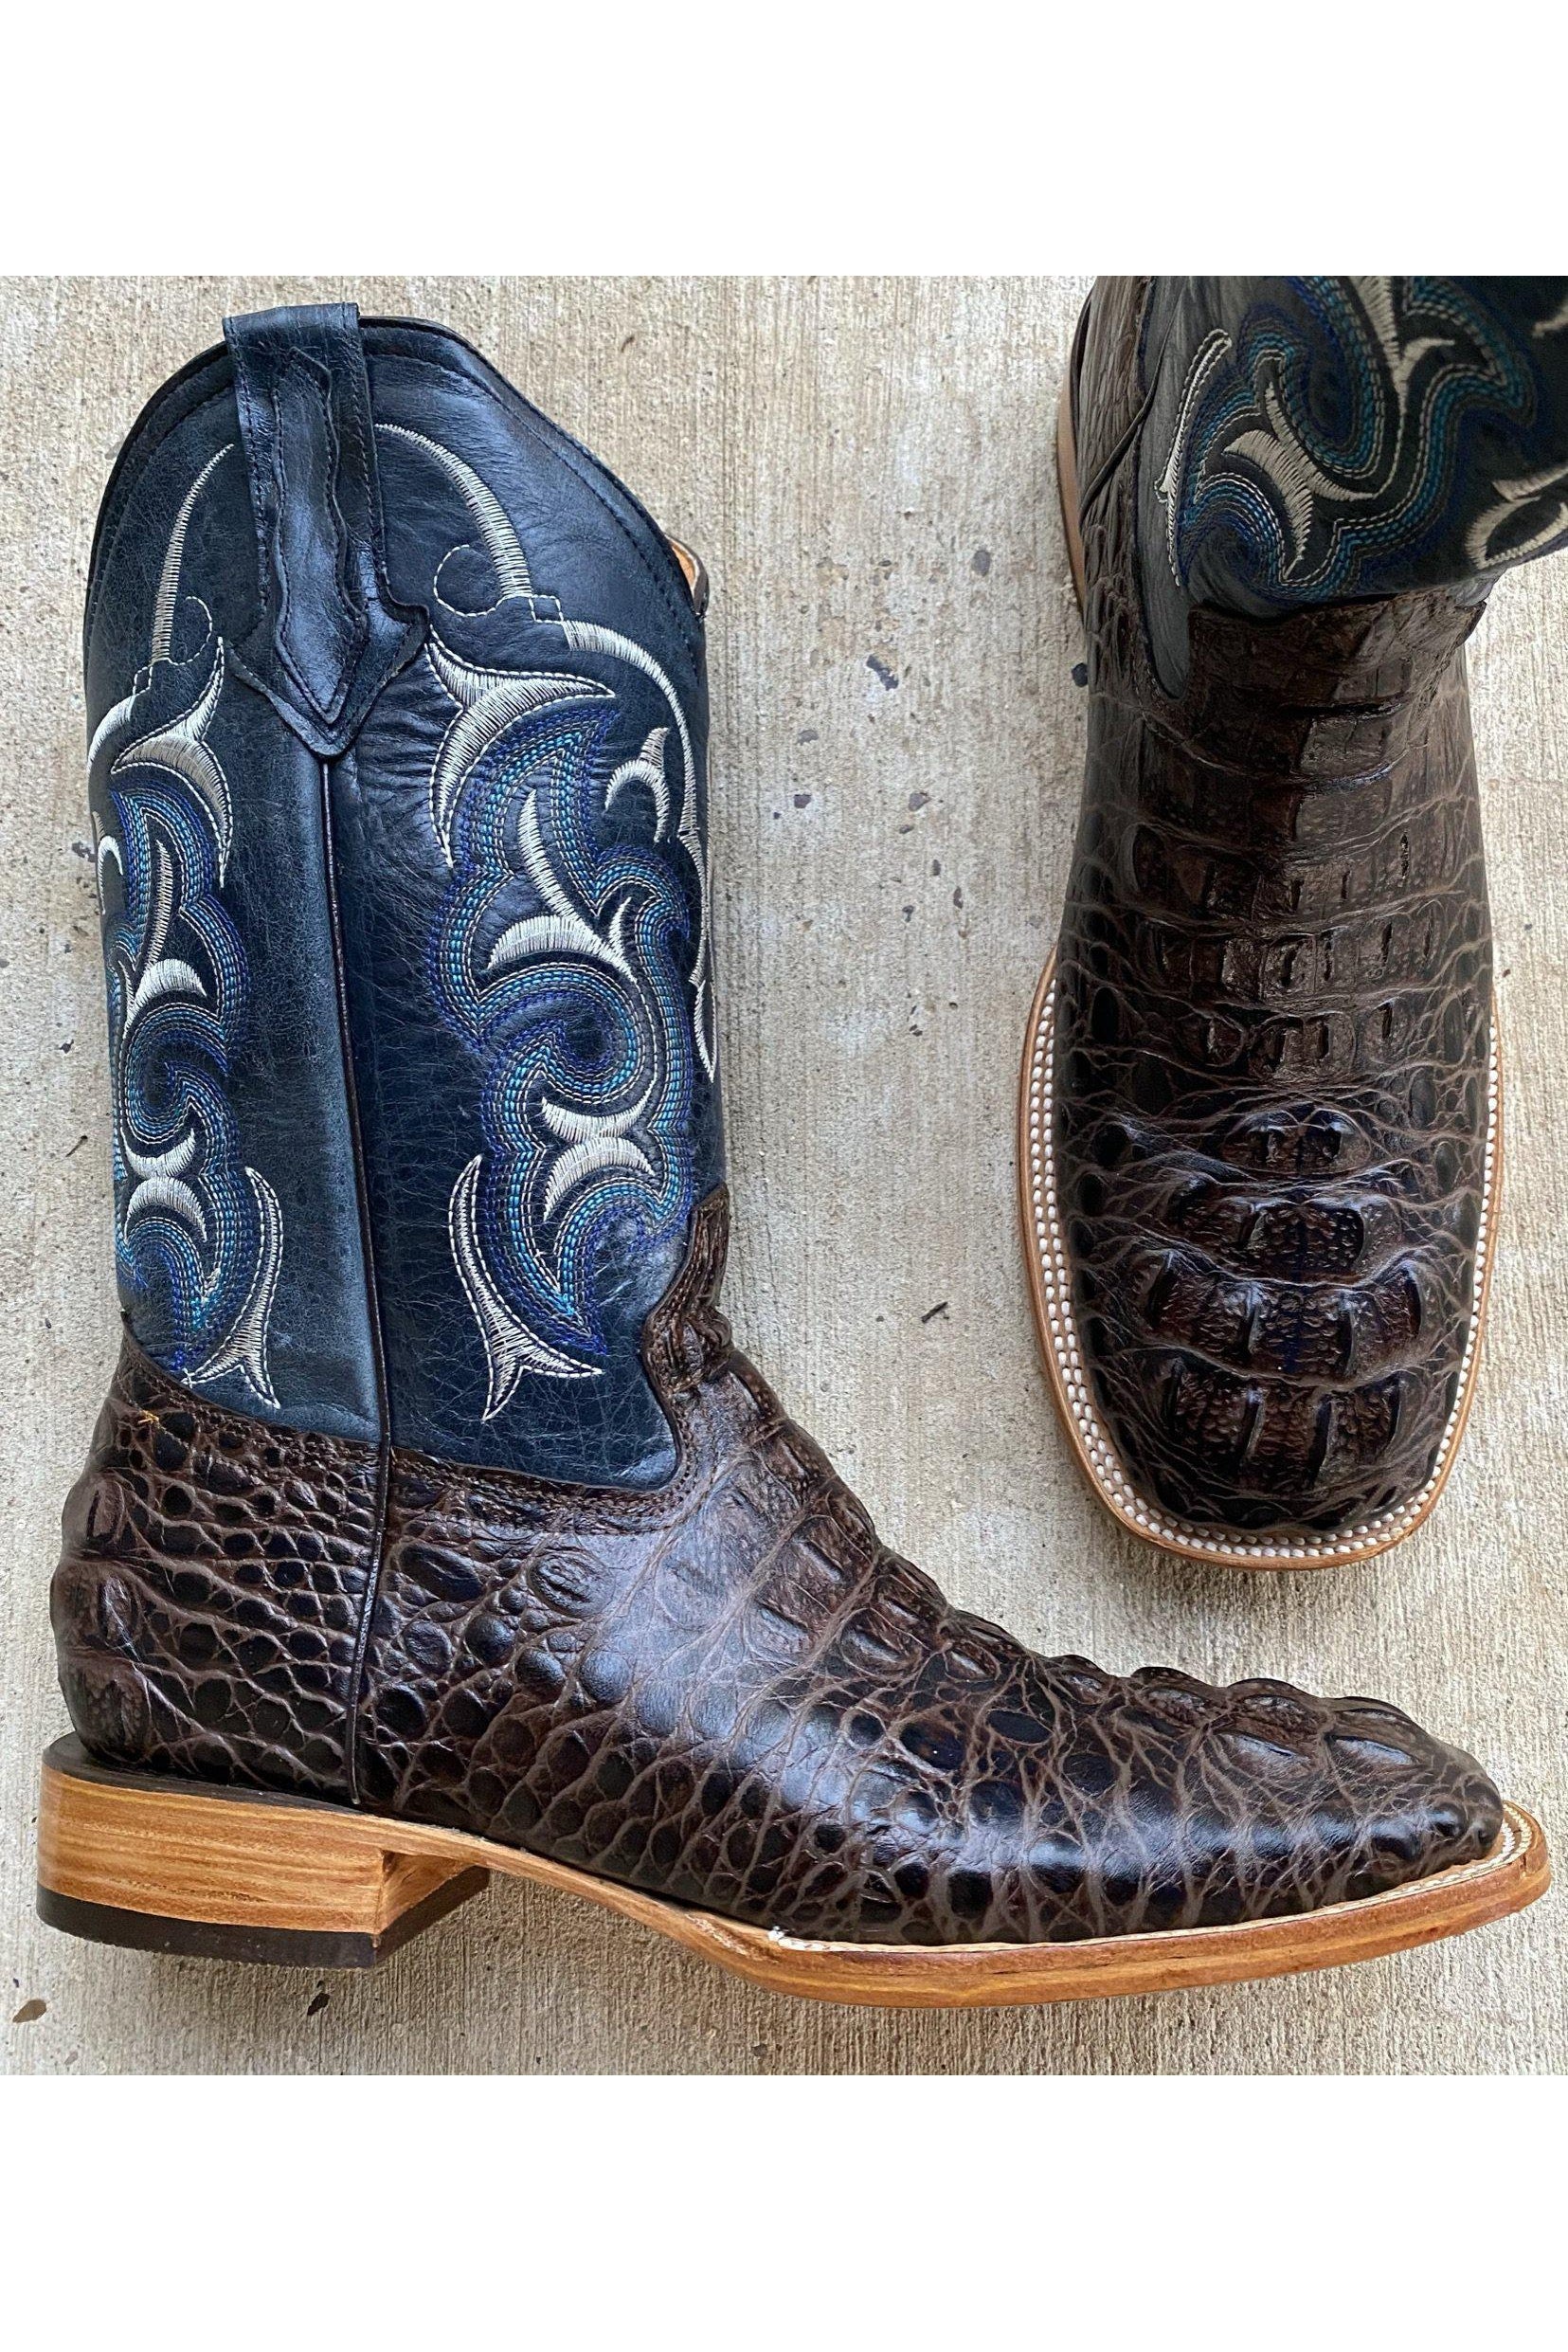 Cactus Exotic Men's Chocolate Brown Blue Caiman Belly Boots